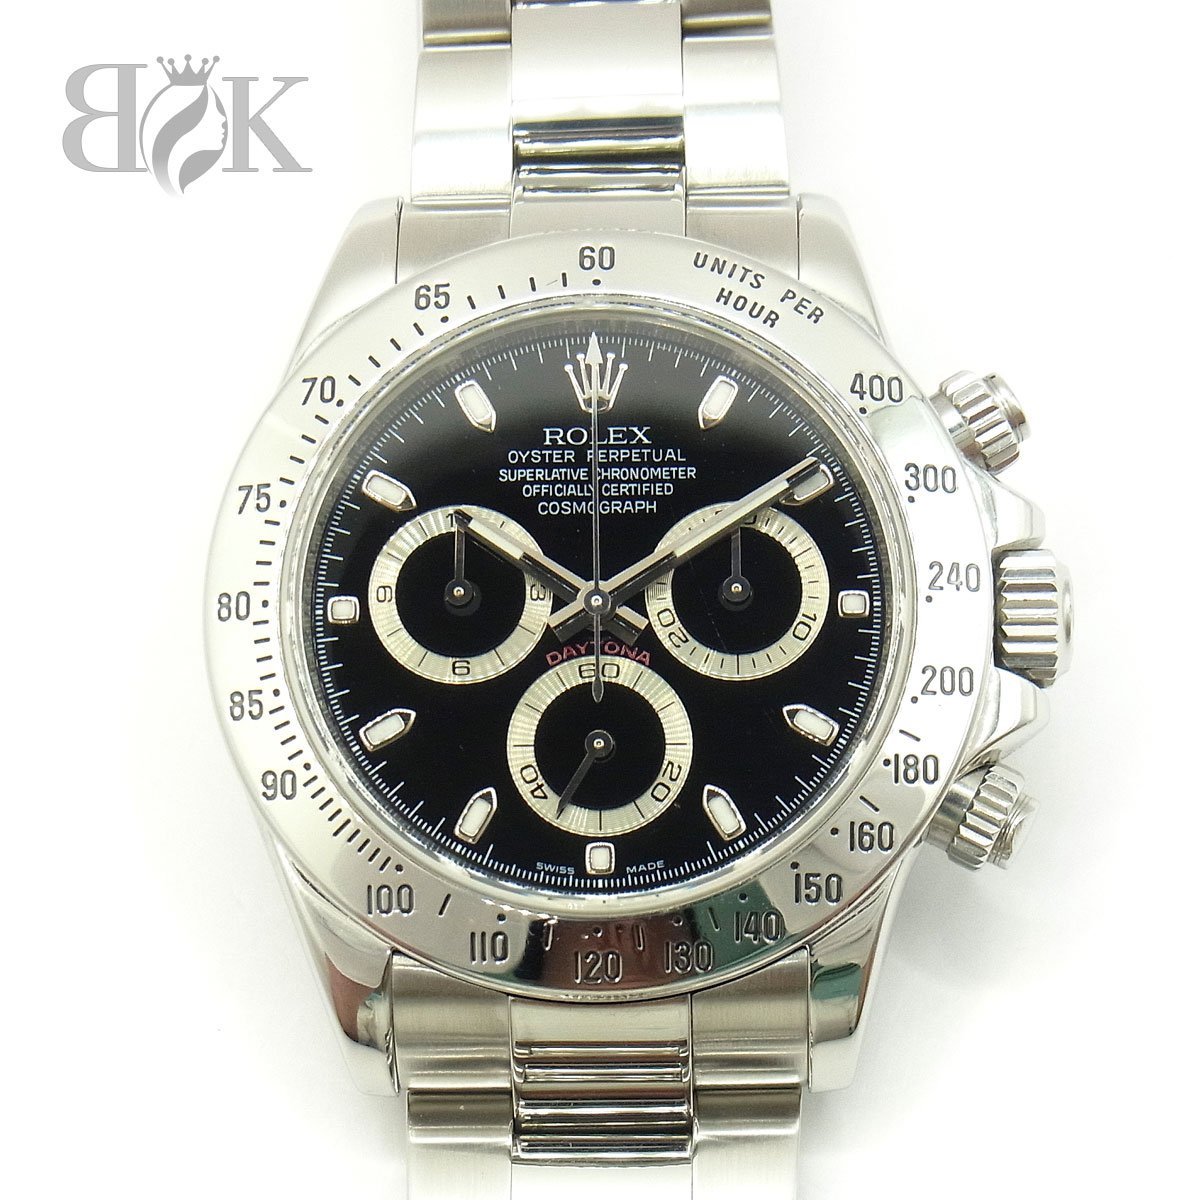  Rolex 116520 Z number Roo let black face Daytona men's SS self-winding watch AT *